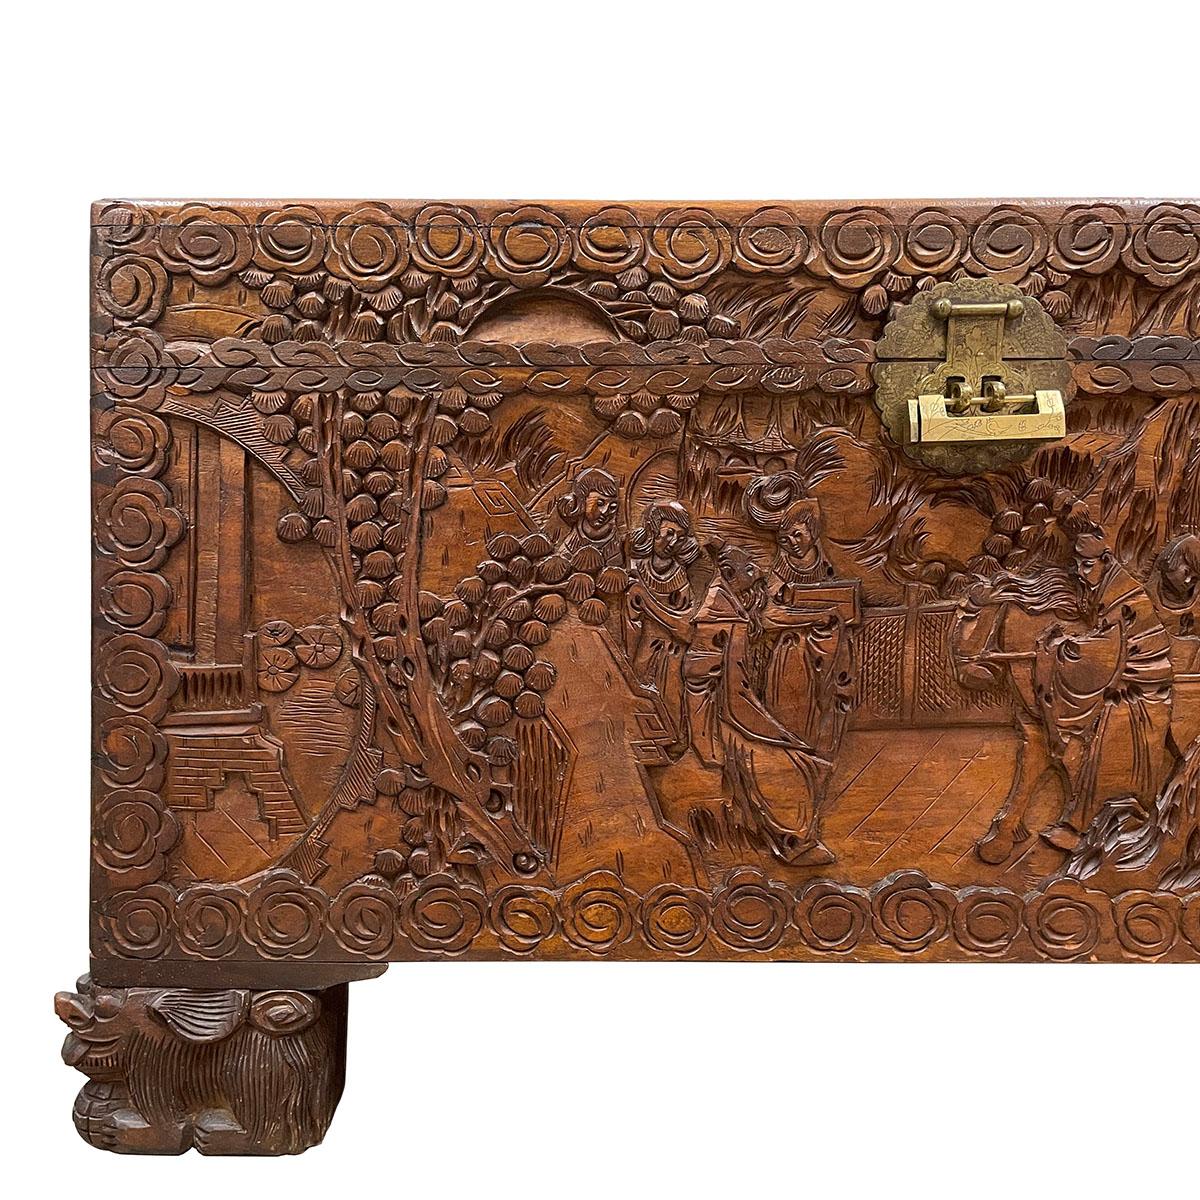 This is a traditional style of Chinese antique massive carved Camphor chest/trunk from China. Very well constructed with a lot of brass angle inside chest to reinforce the joint. It was sailor's hope chest with all the sailor's best wishes and hopes